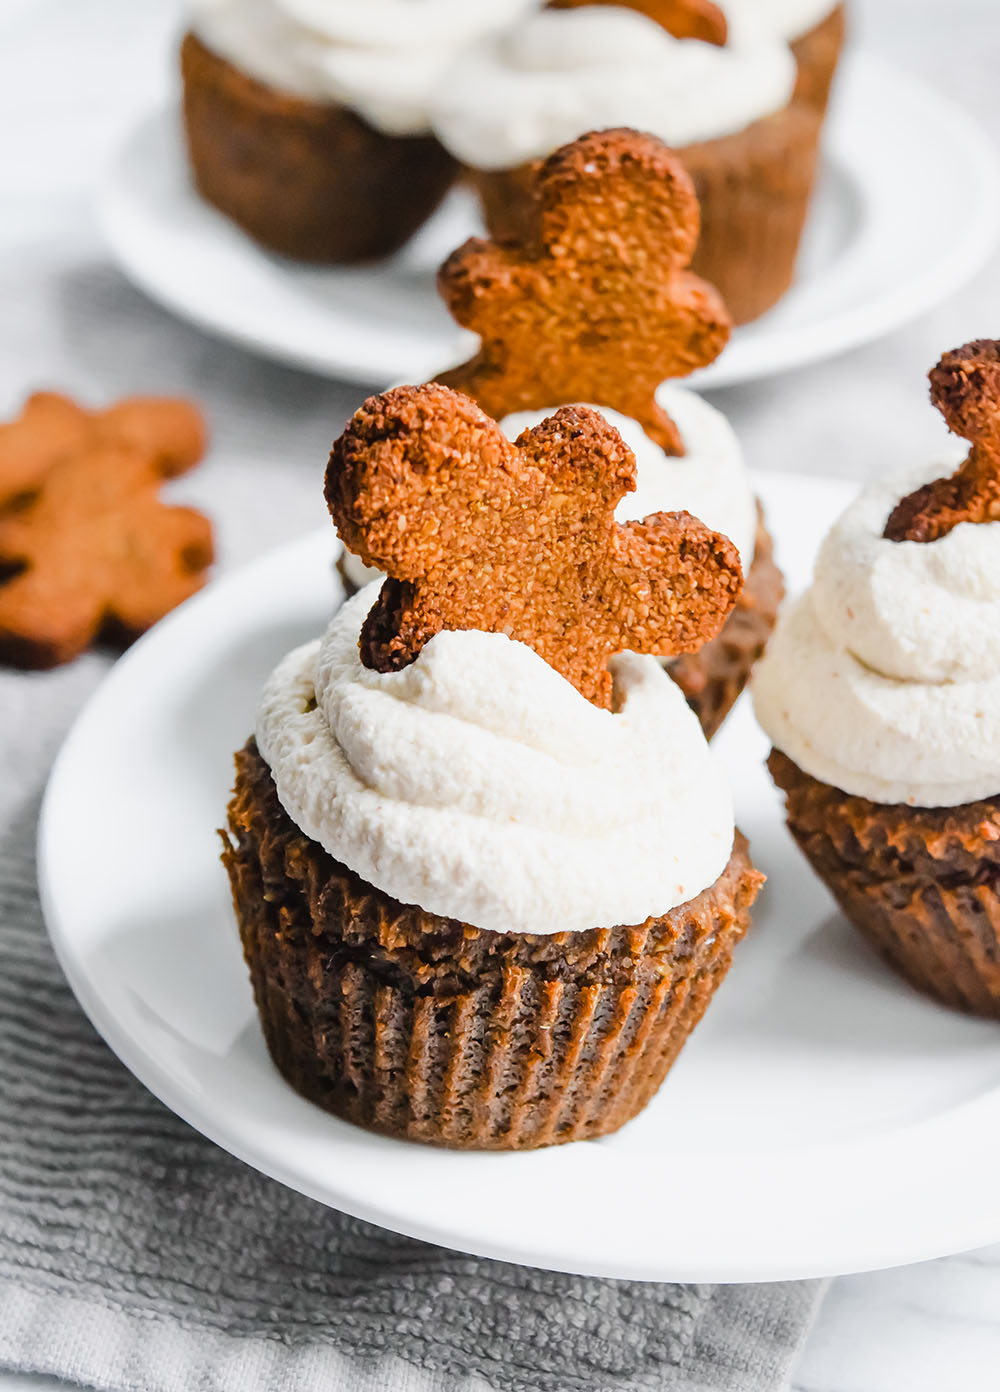 Vegan Gingerbread Cupcakes with Cream Cheese Frosting